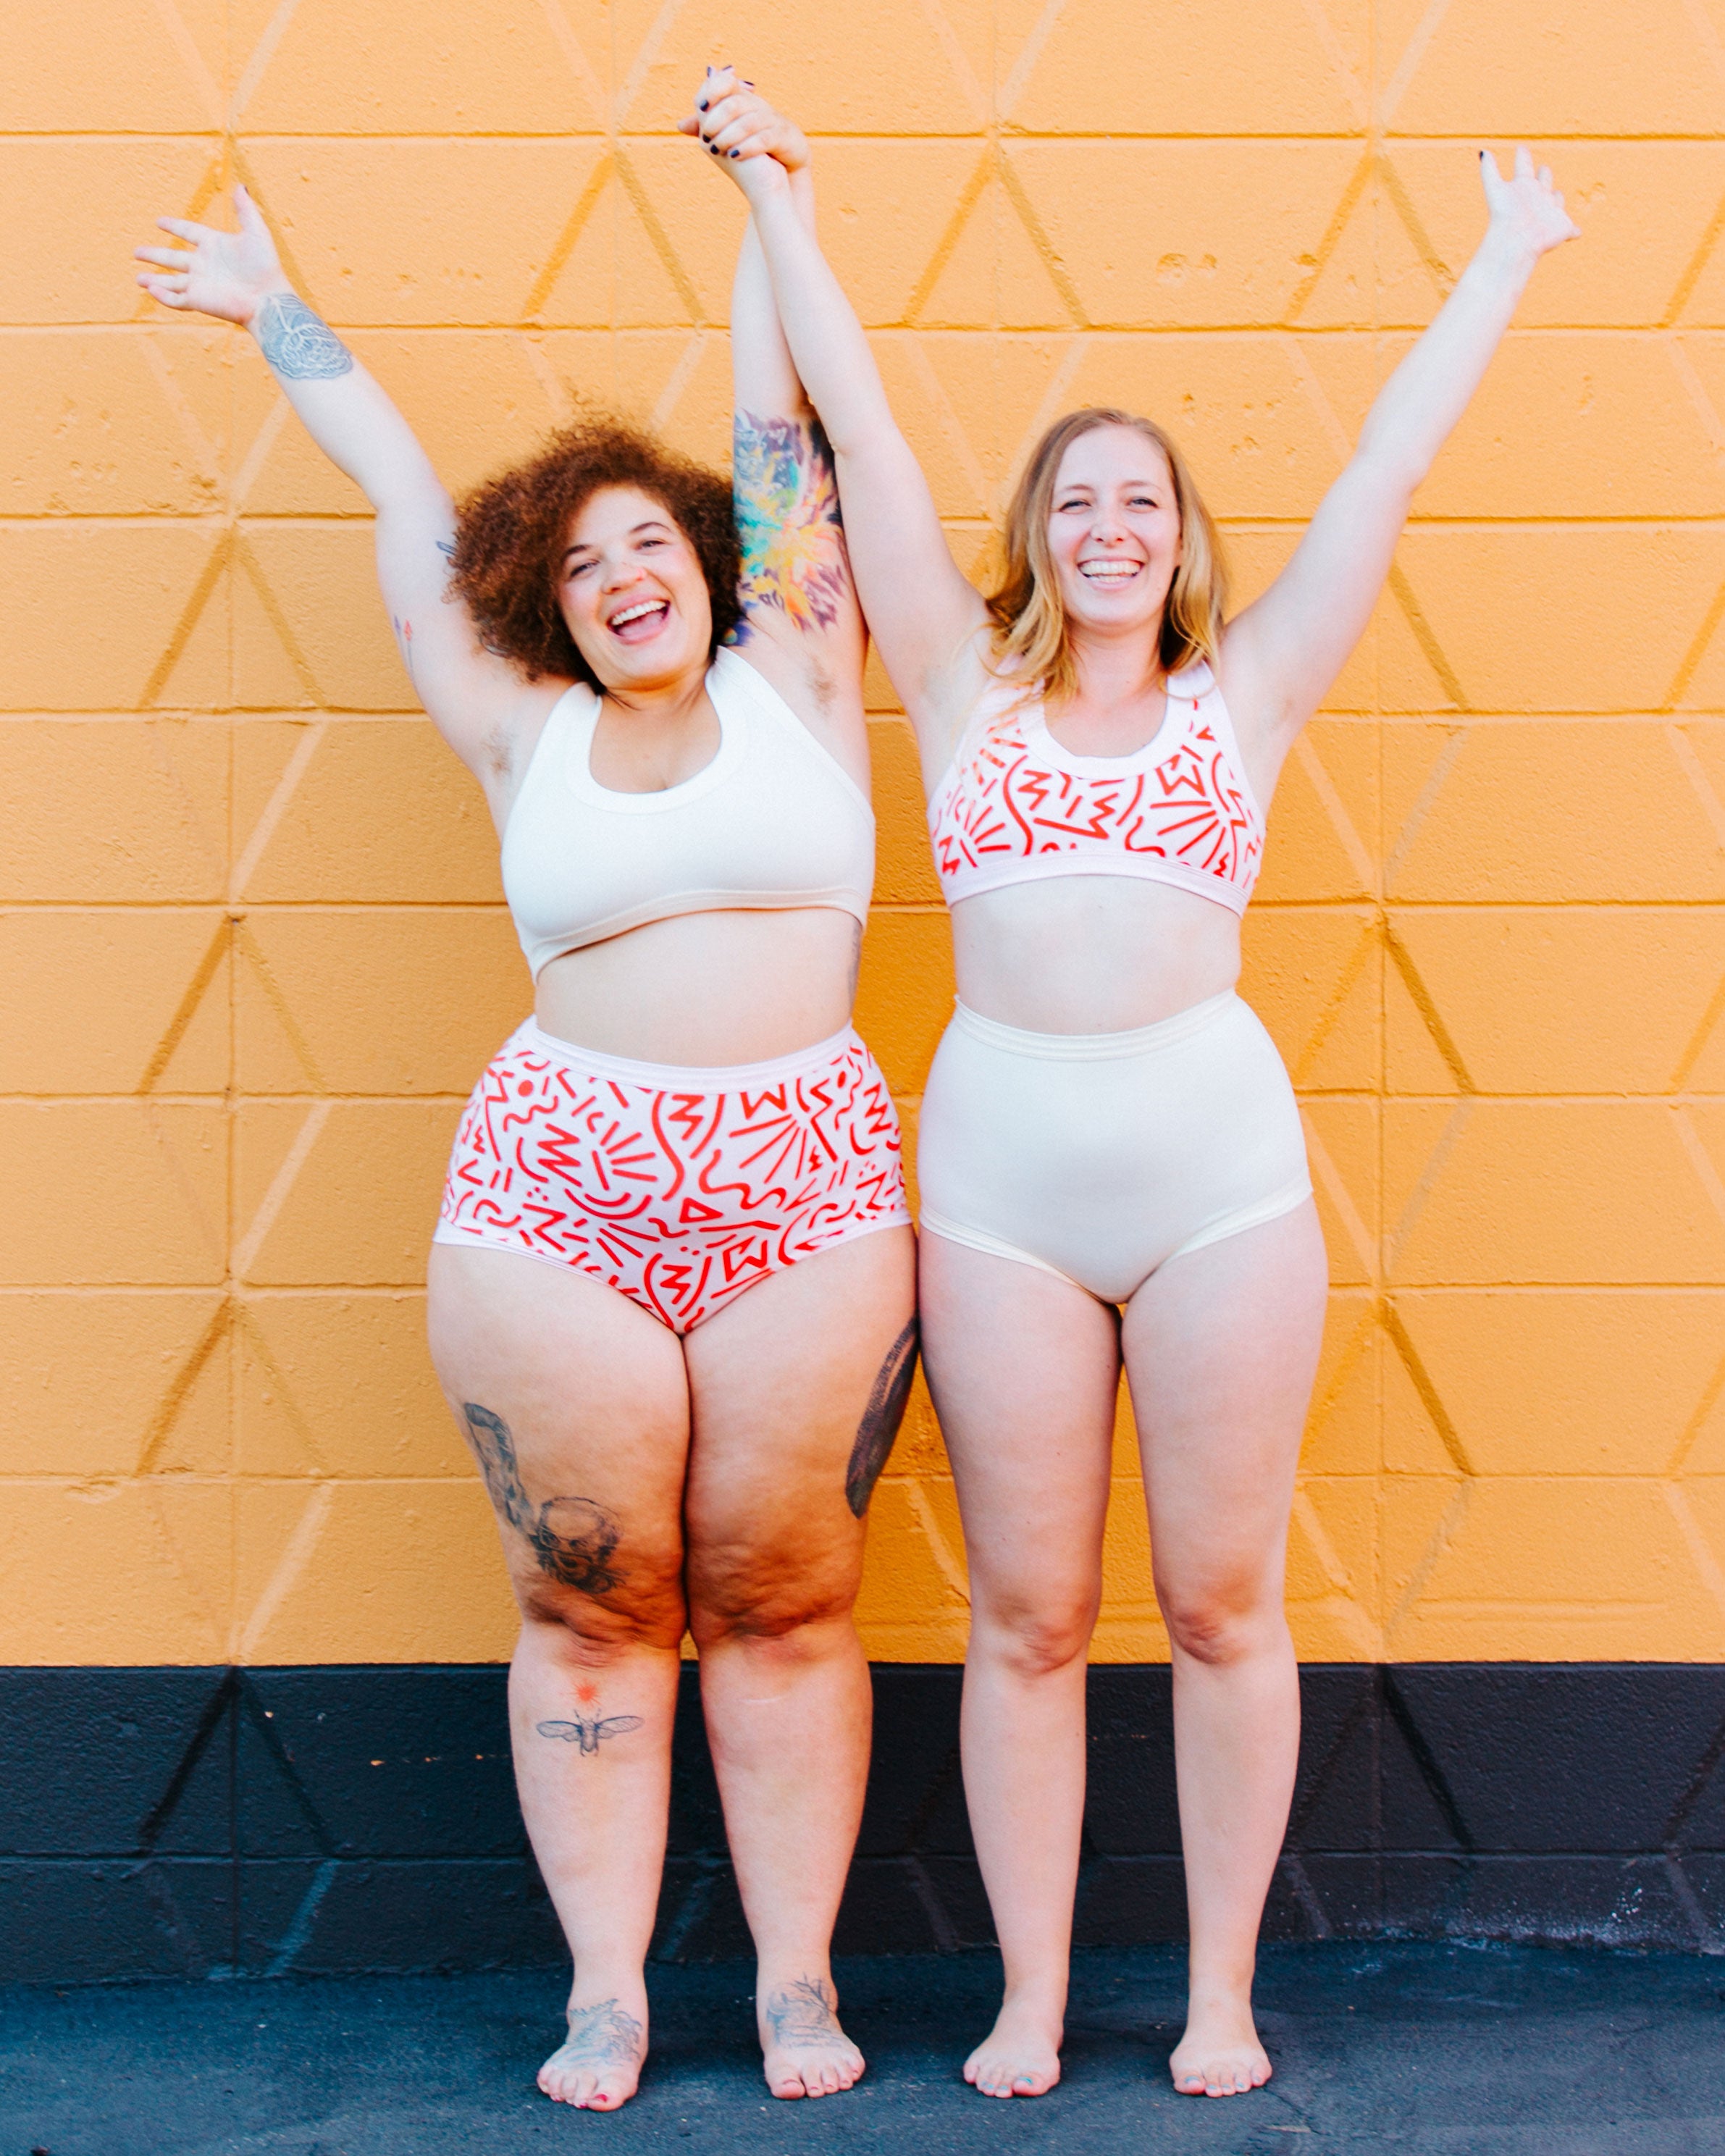 Two models standing together smiling wearing Thunderpants organic cotton Sky Rise style underwear and Bralettes in both Plain Vanilla and our Energy Vibes print.